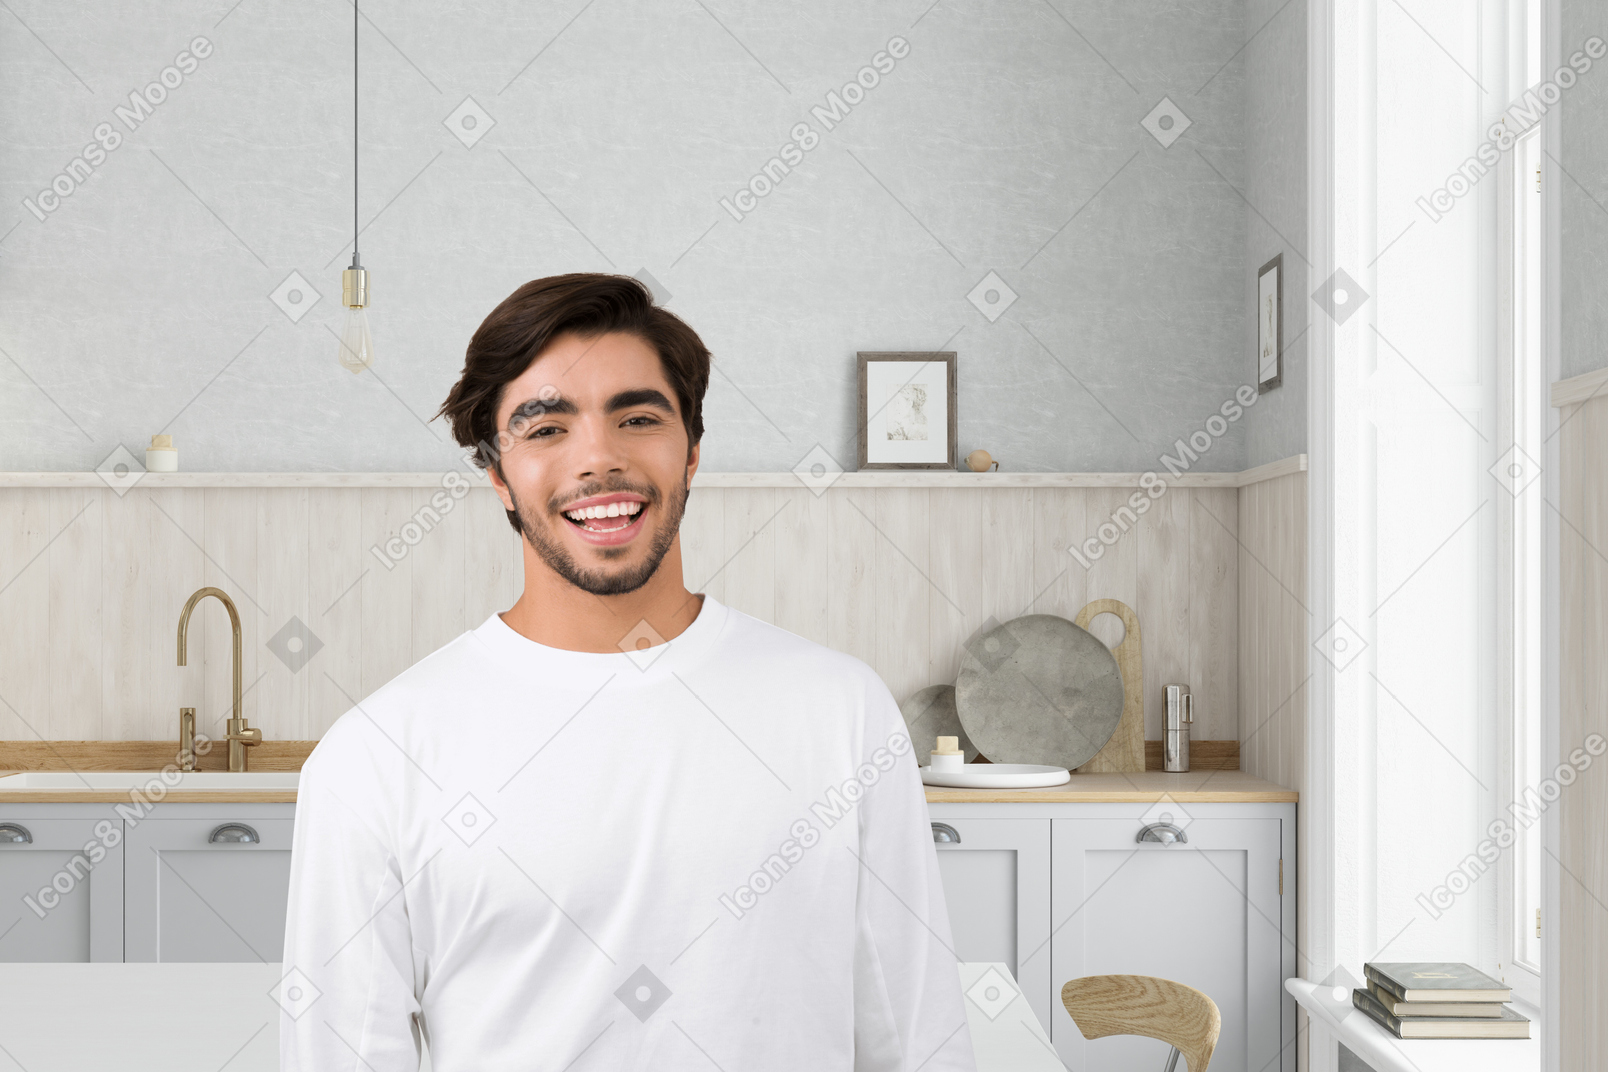 Young cheerful man on kitchen background